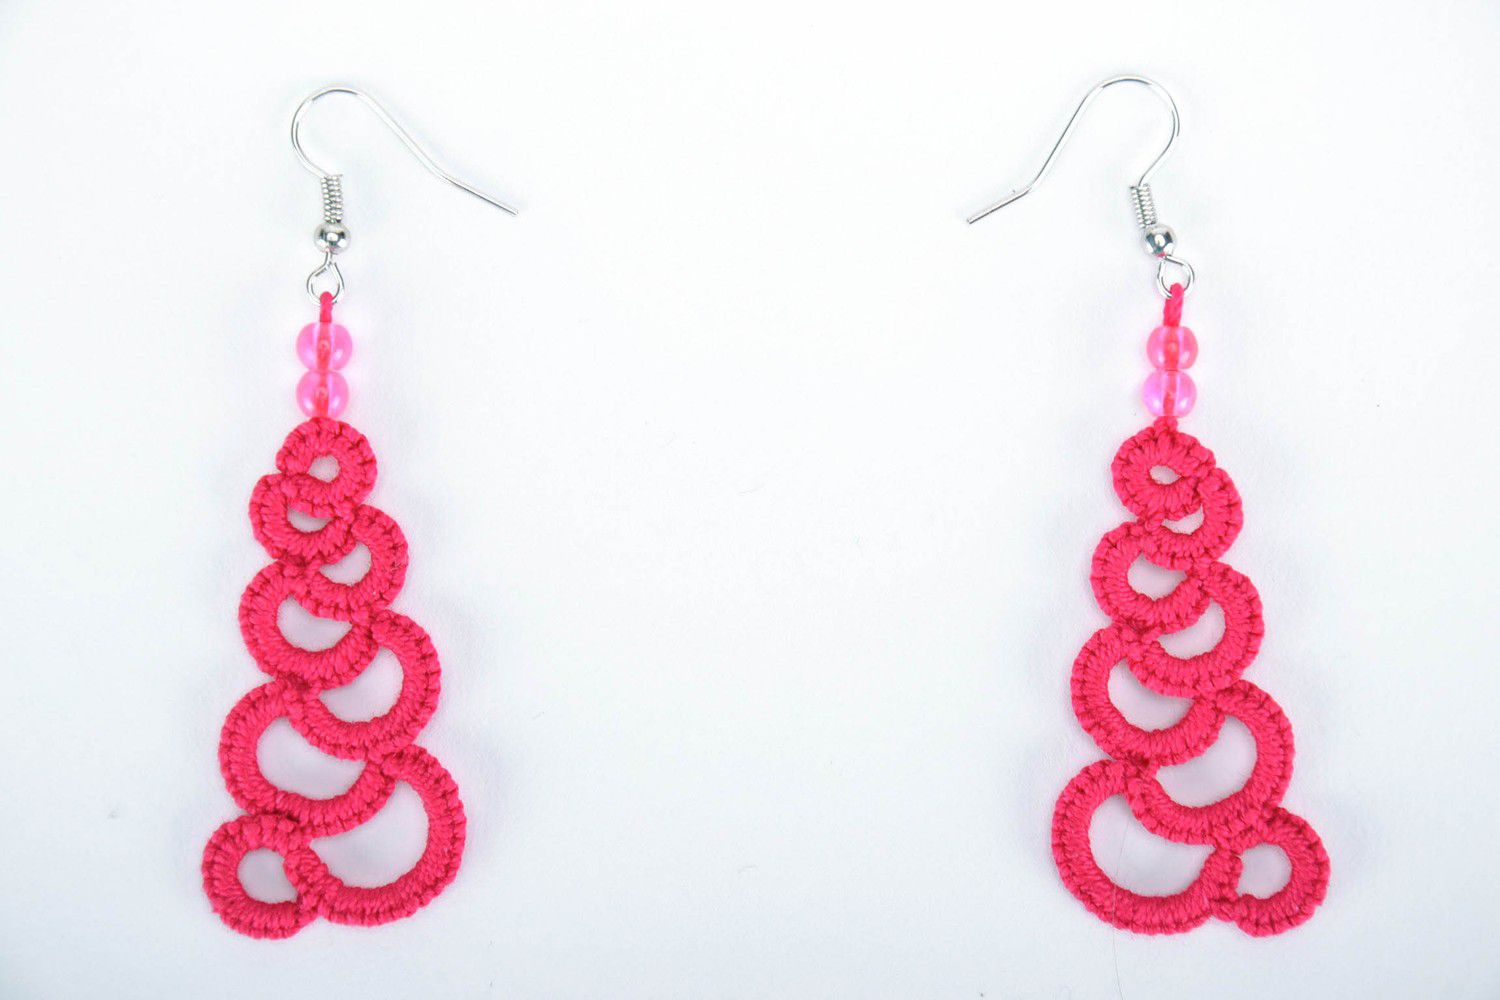 Crimson earrings made from woven lace photo 3